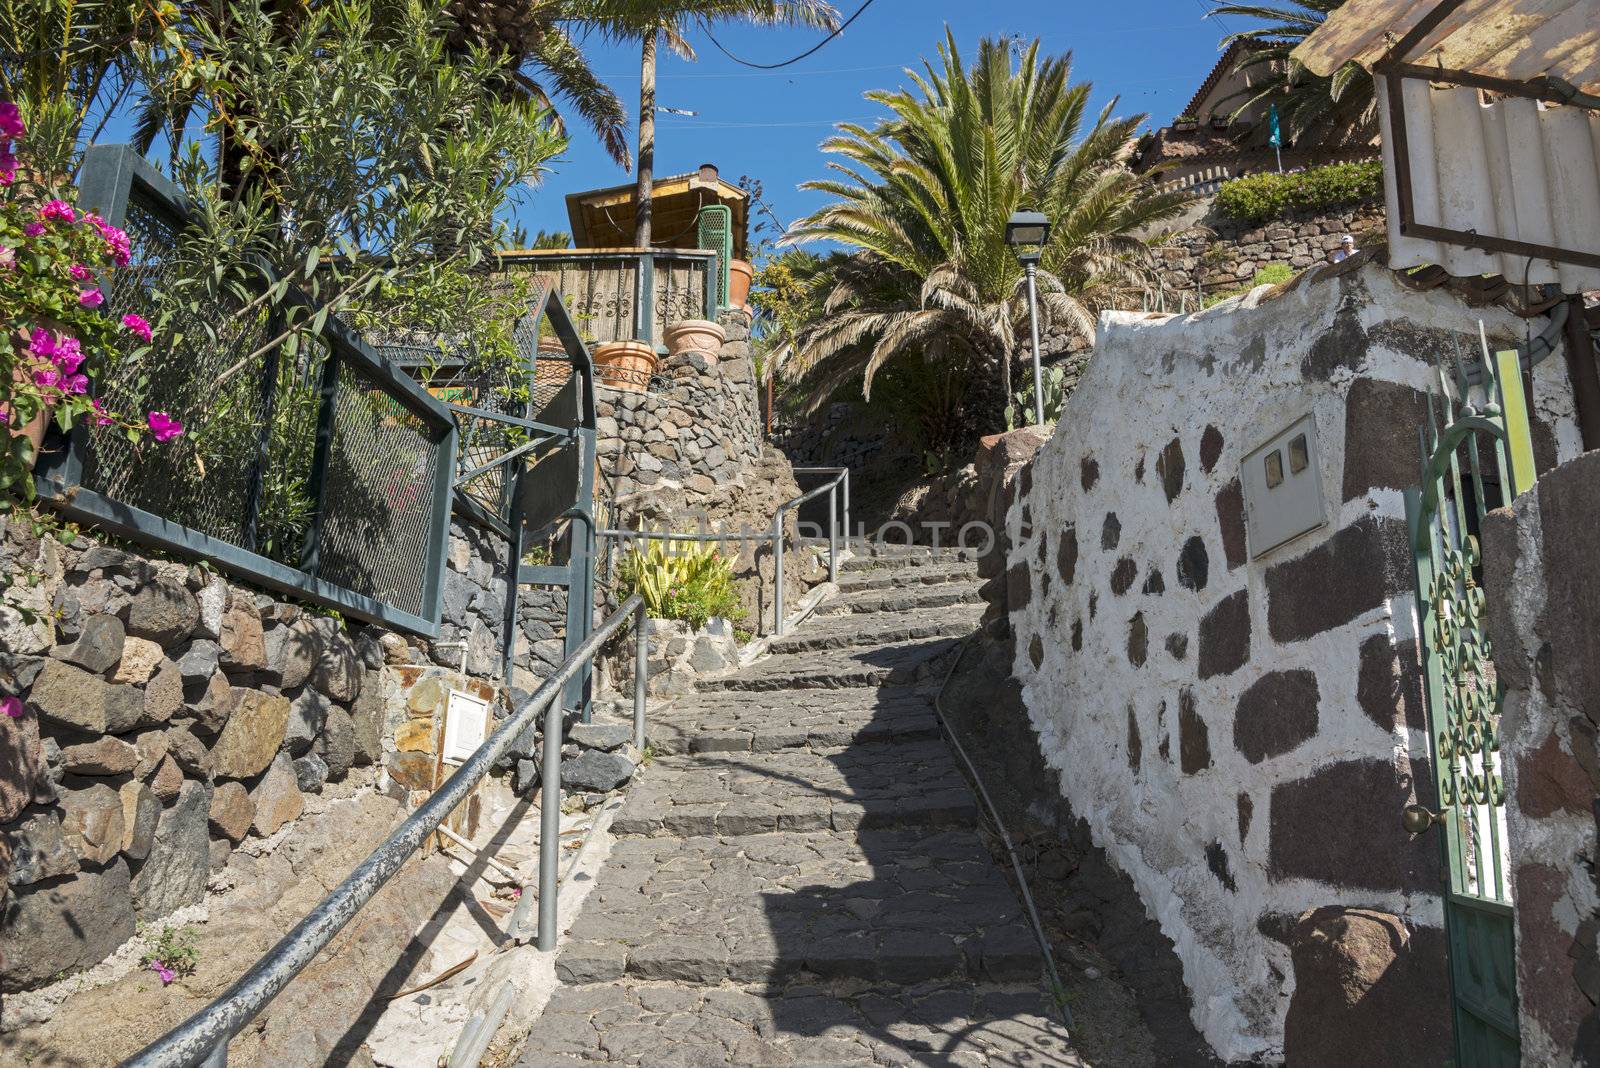 stairs in the small village Masca on the island Tenerife